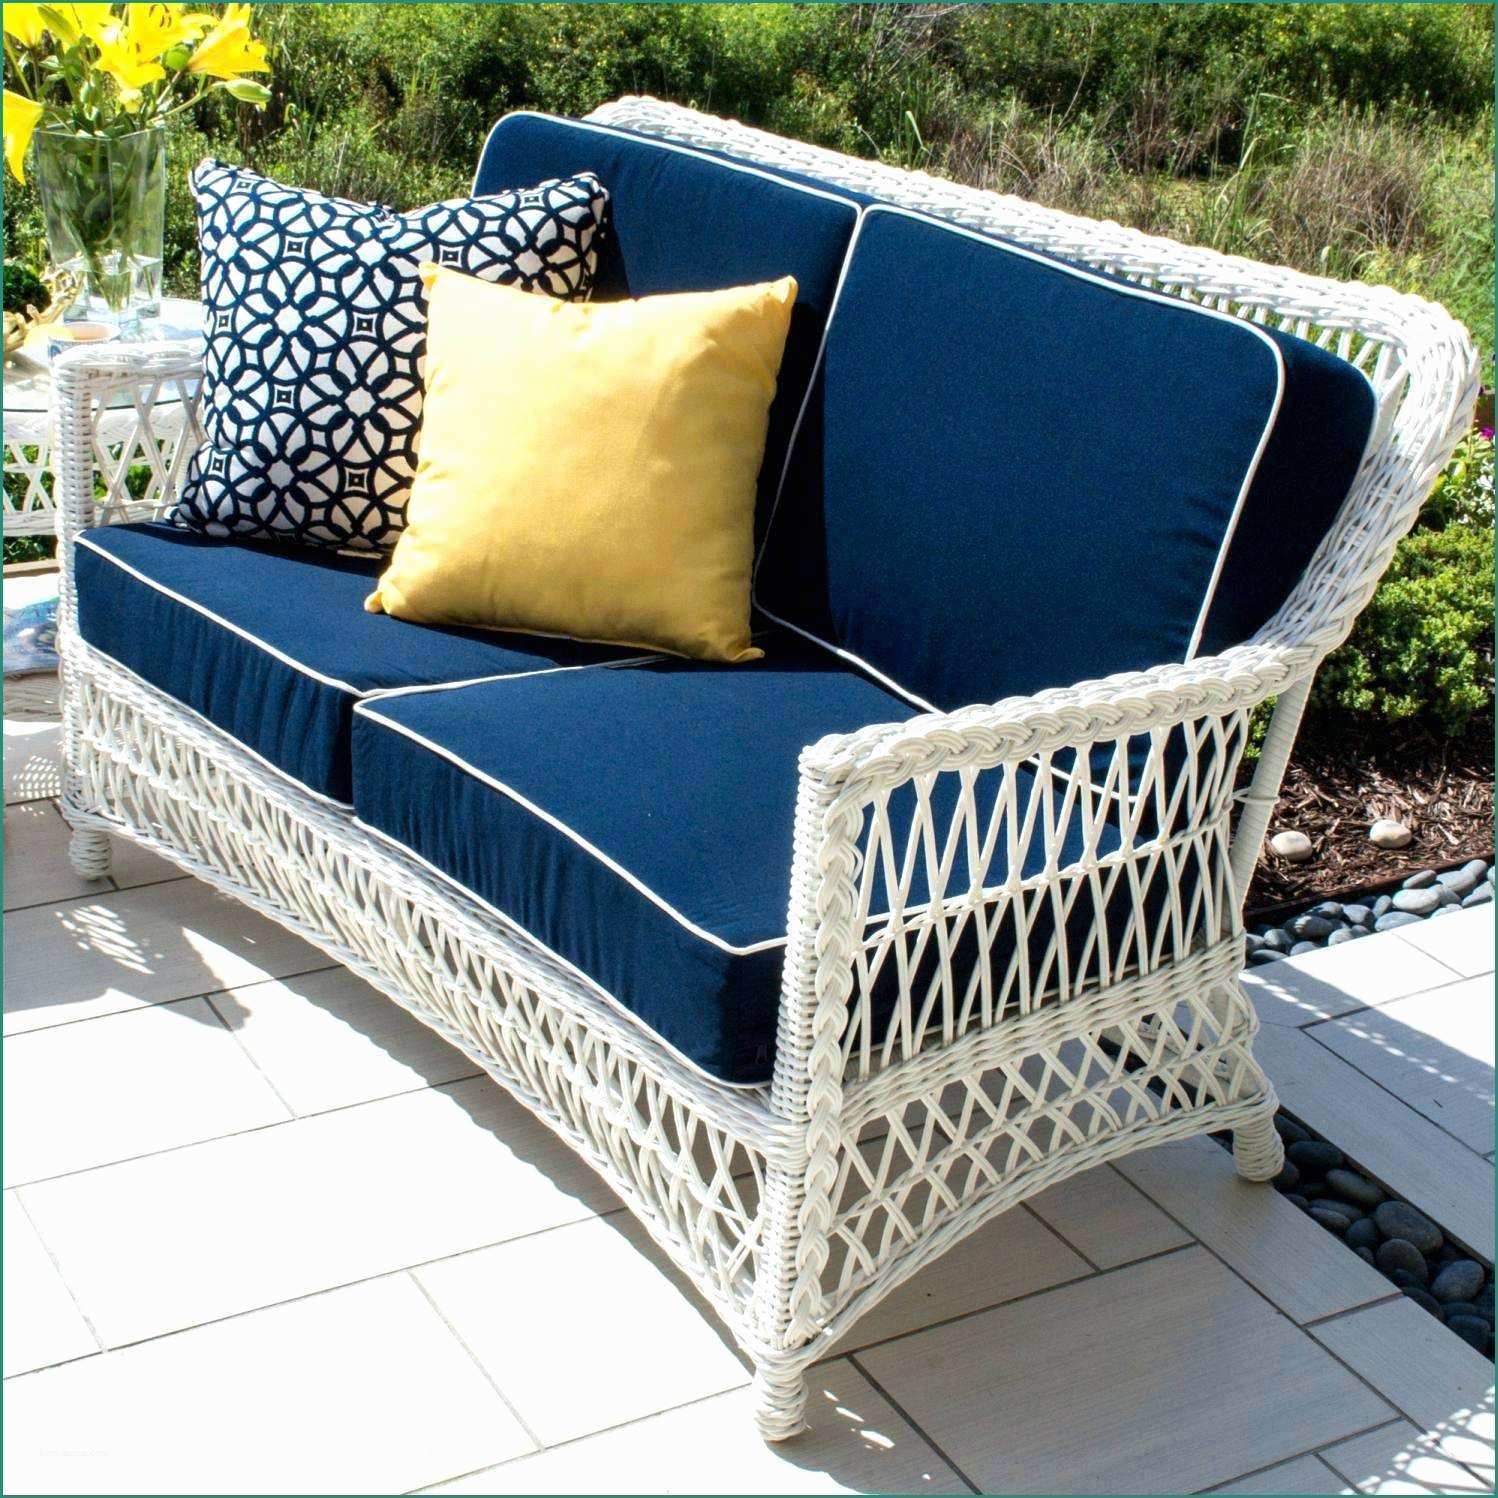 Pouf Chaise Longue E Chaise with Arms Unique Patio Furniture Chaise Lounge Lovely Indoor